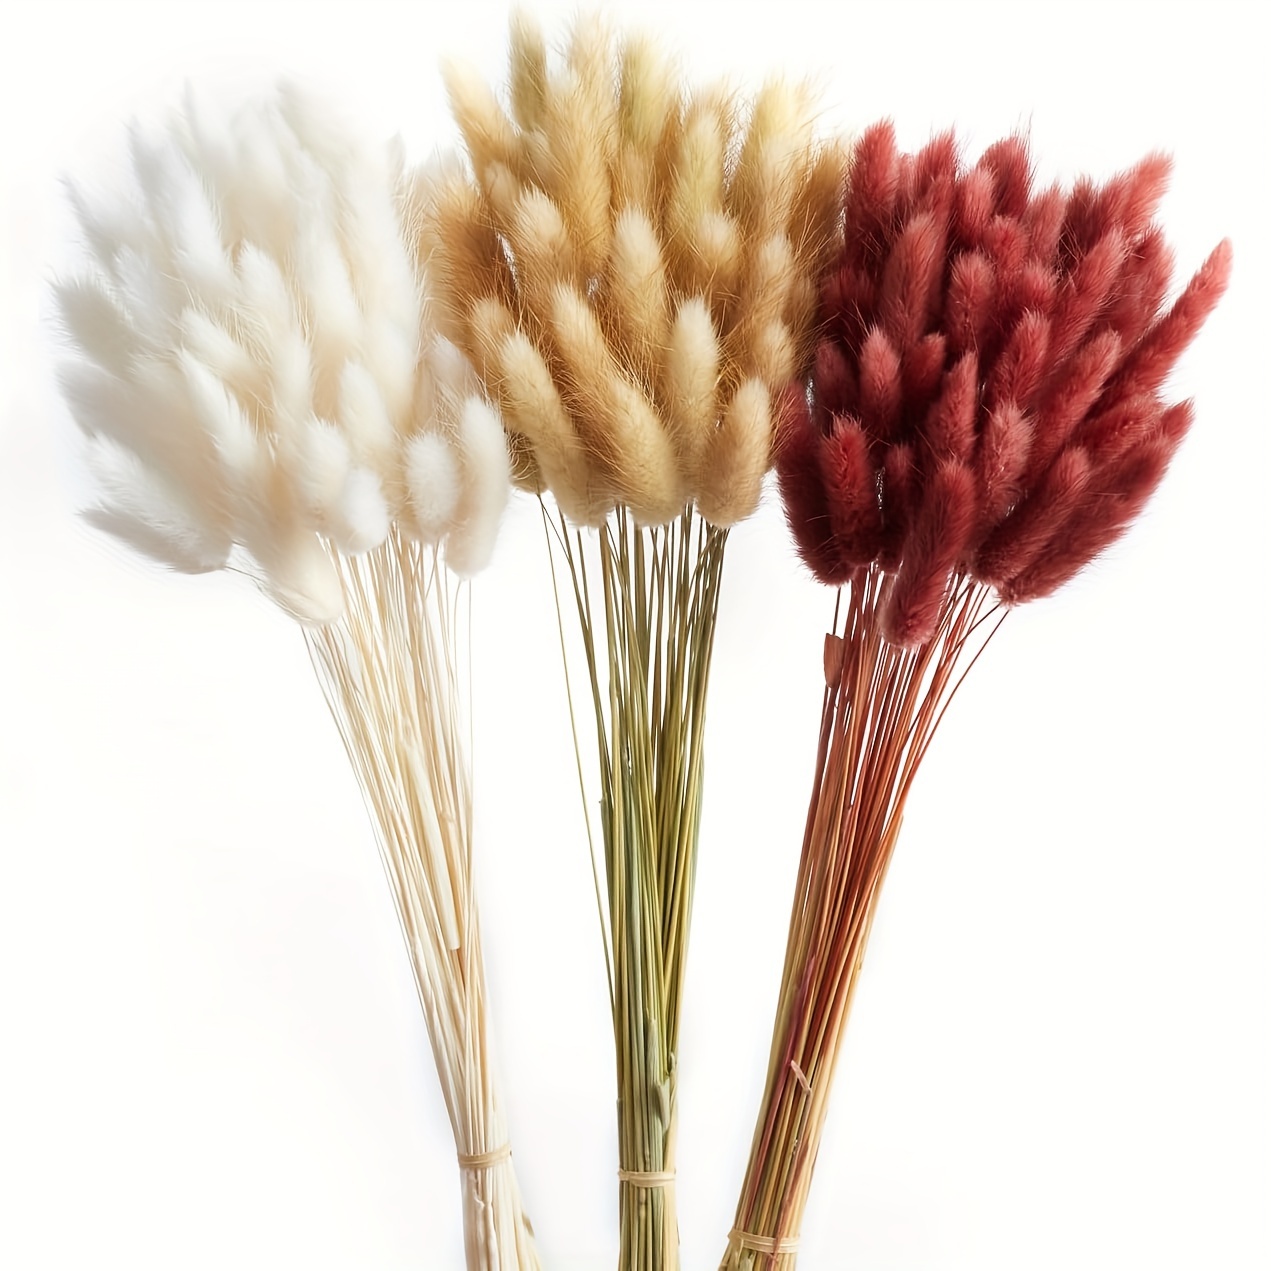 

90-piece Bunny Tails Dried Flower Bouquet - 17" Pampas Grass In Crimson, Natural & White For Boho Weddings And Fall Home Decor